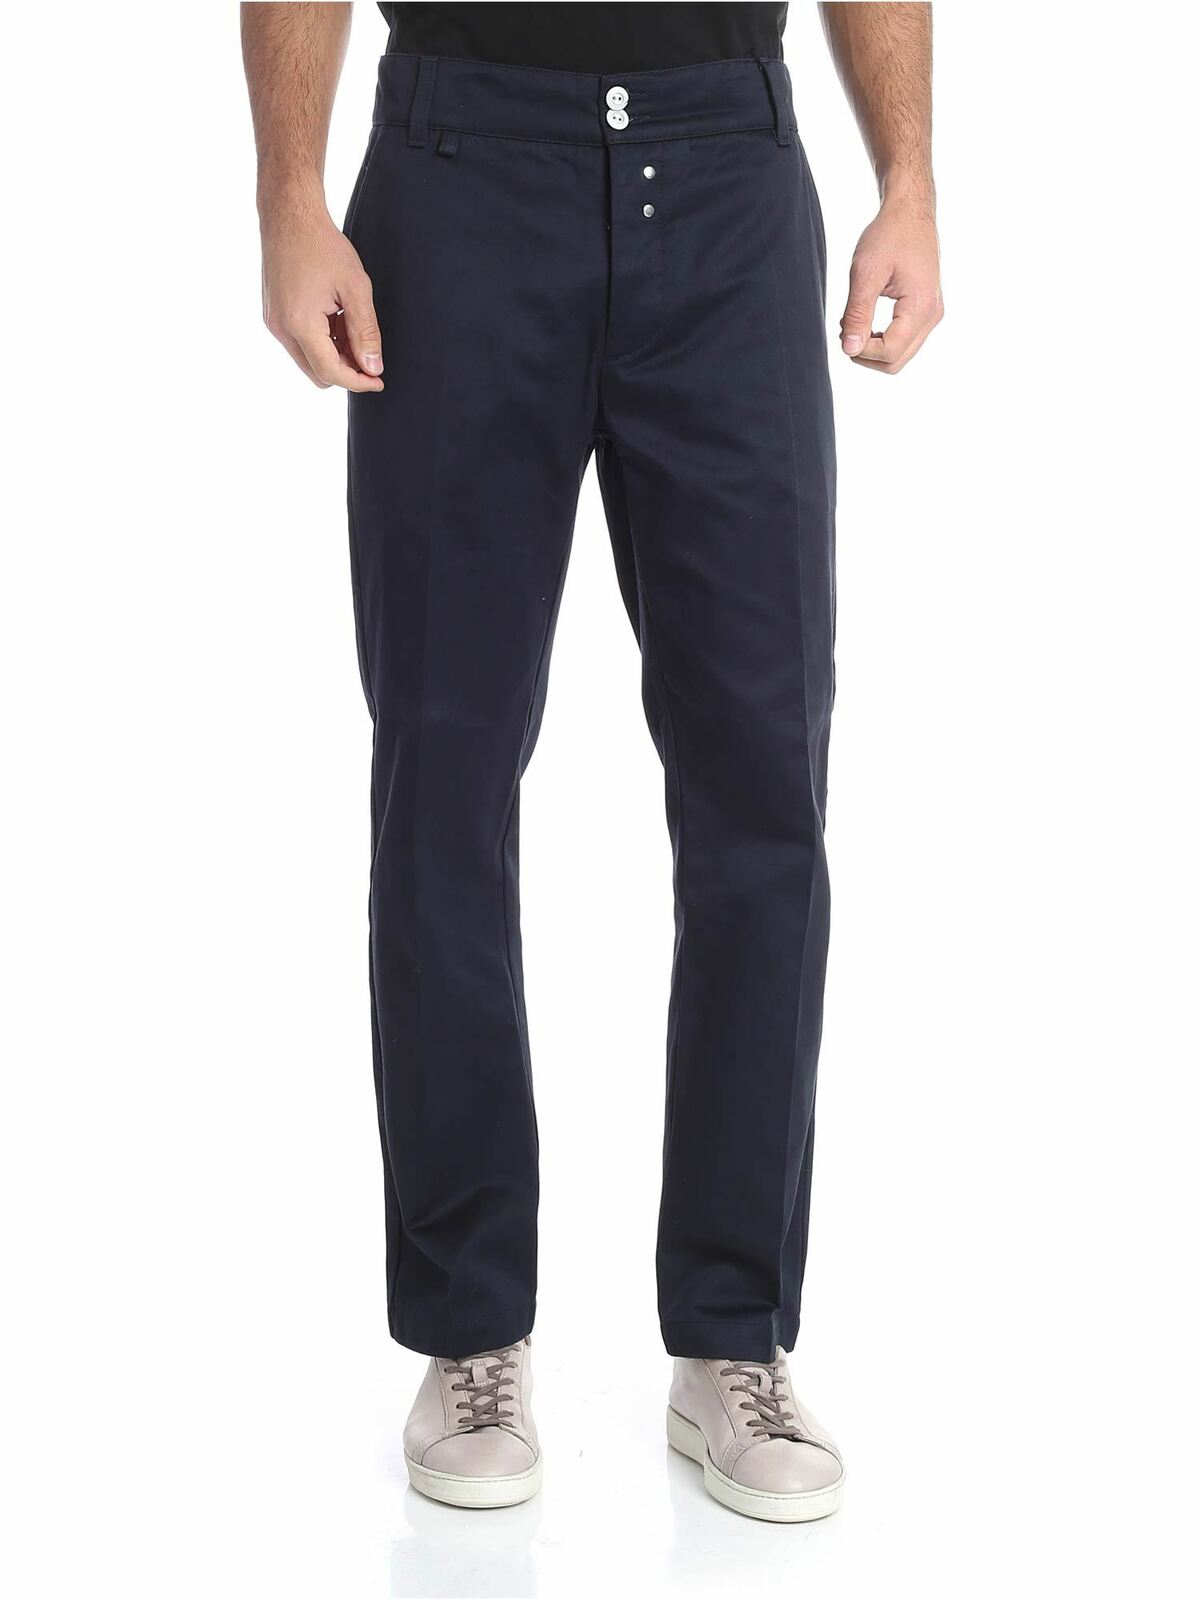 Vivienne Westwood Anglomania "chaos" Blue Trousers